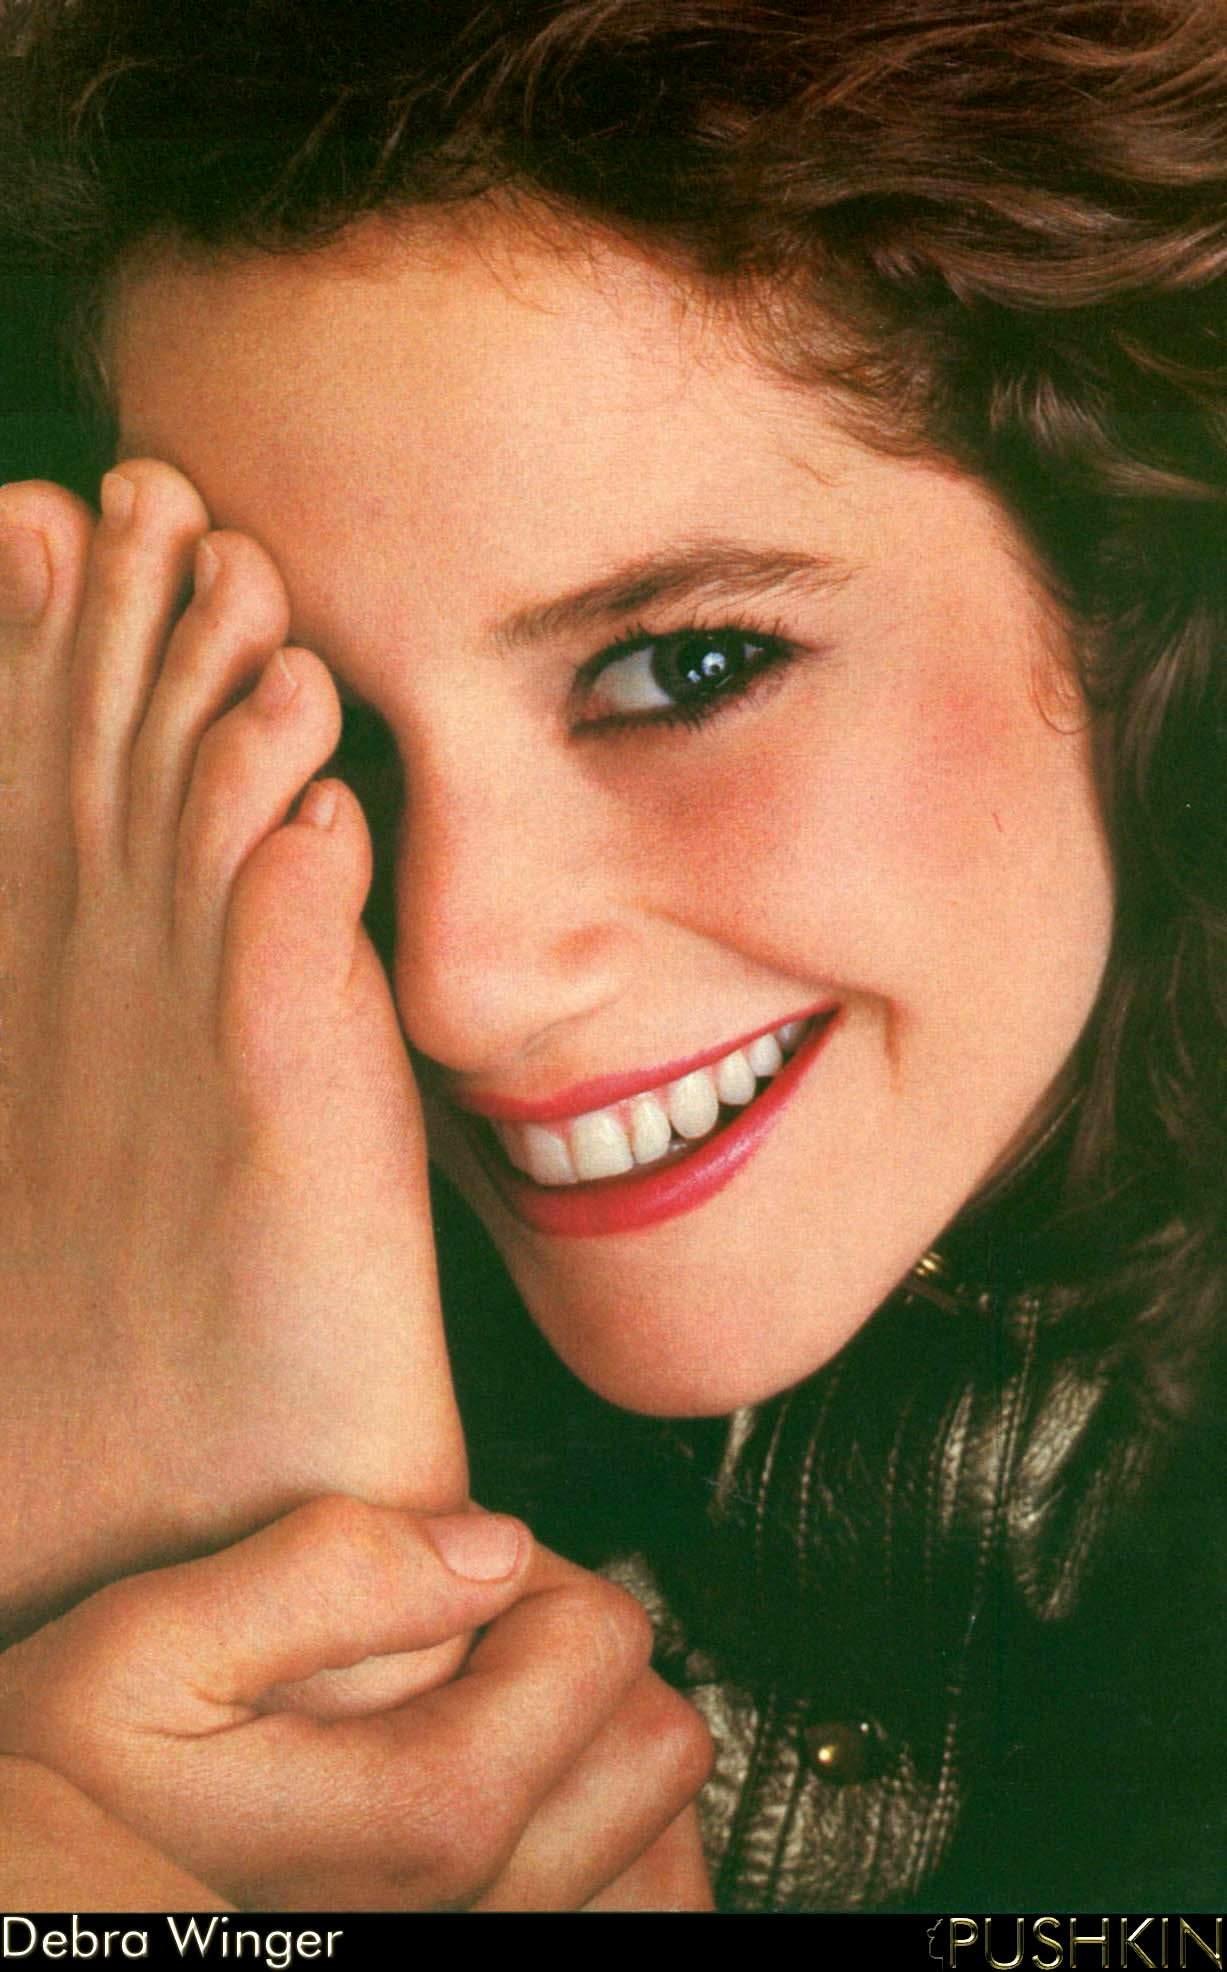 People who liked Debra Winger's feet, also liked.